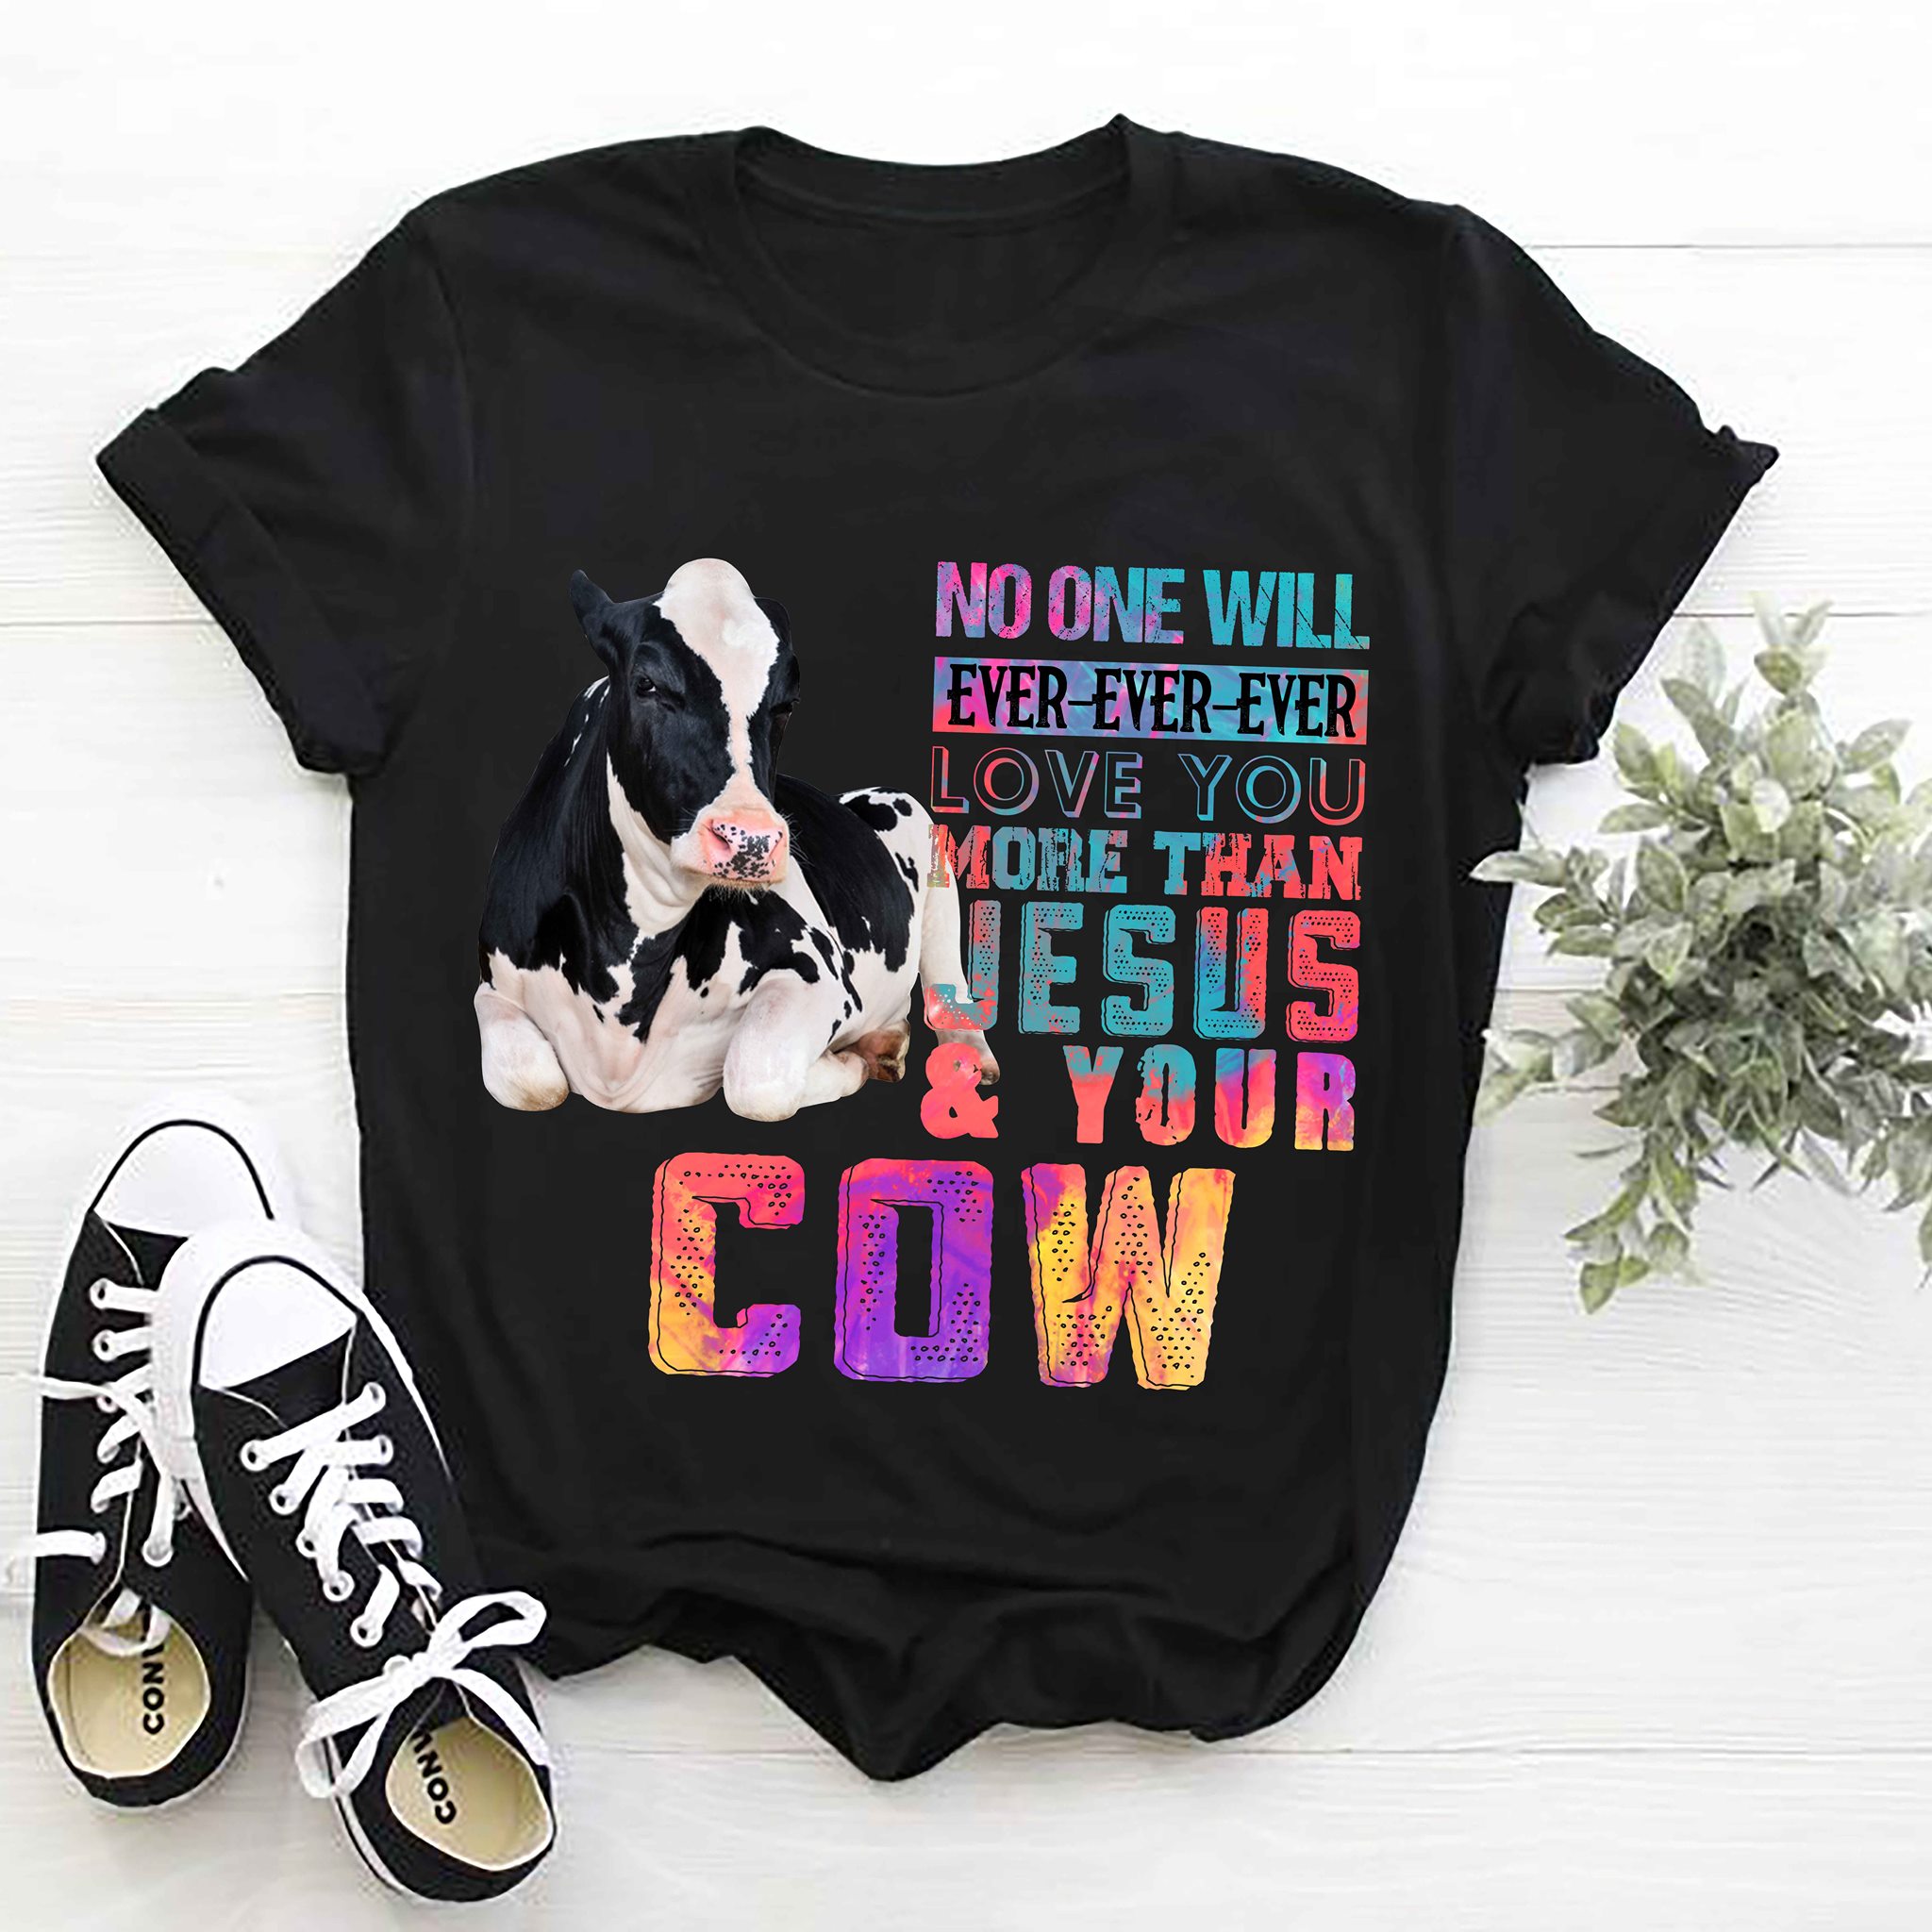 No one will ever ever ever love you more than Jesus and your cow - Grumpy milk cow